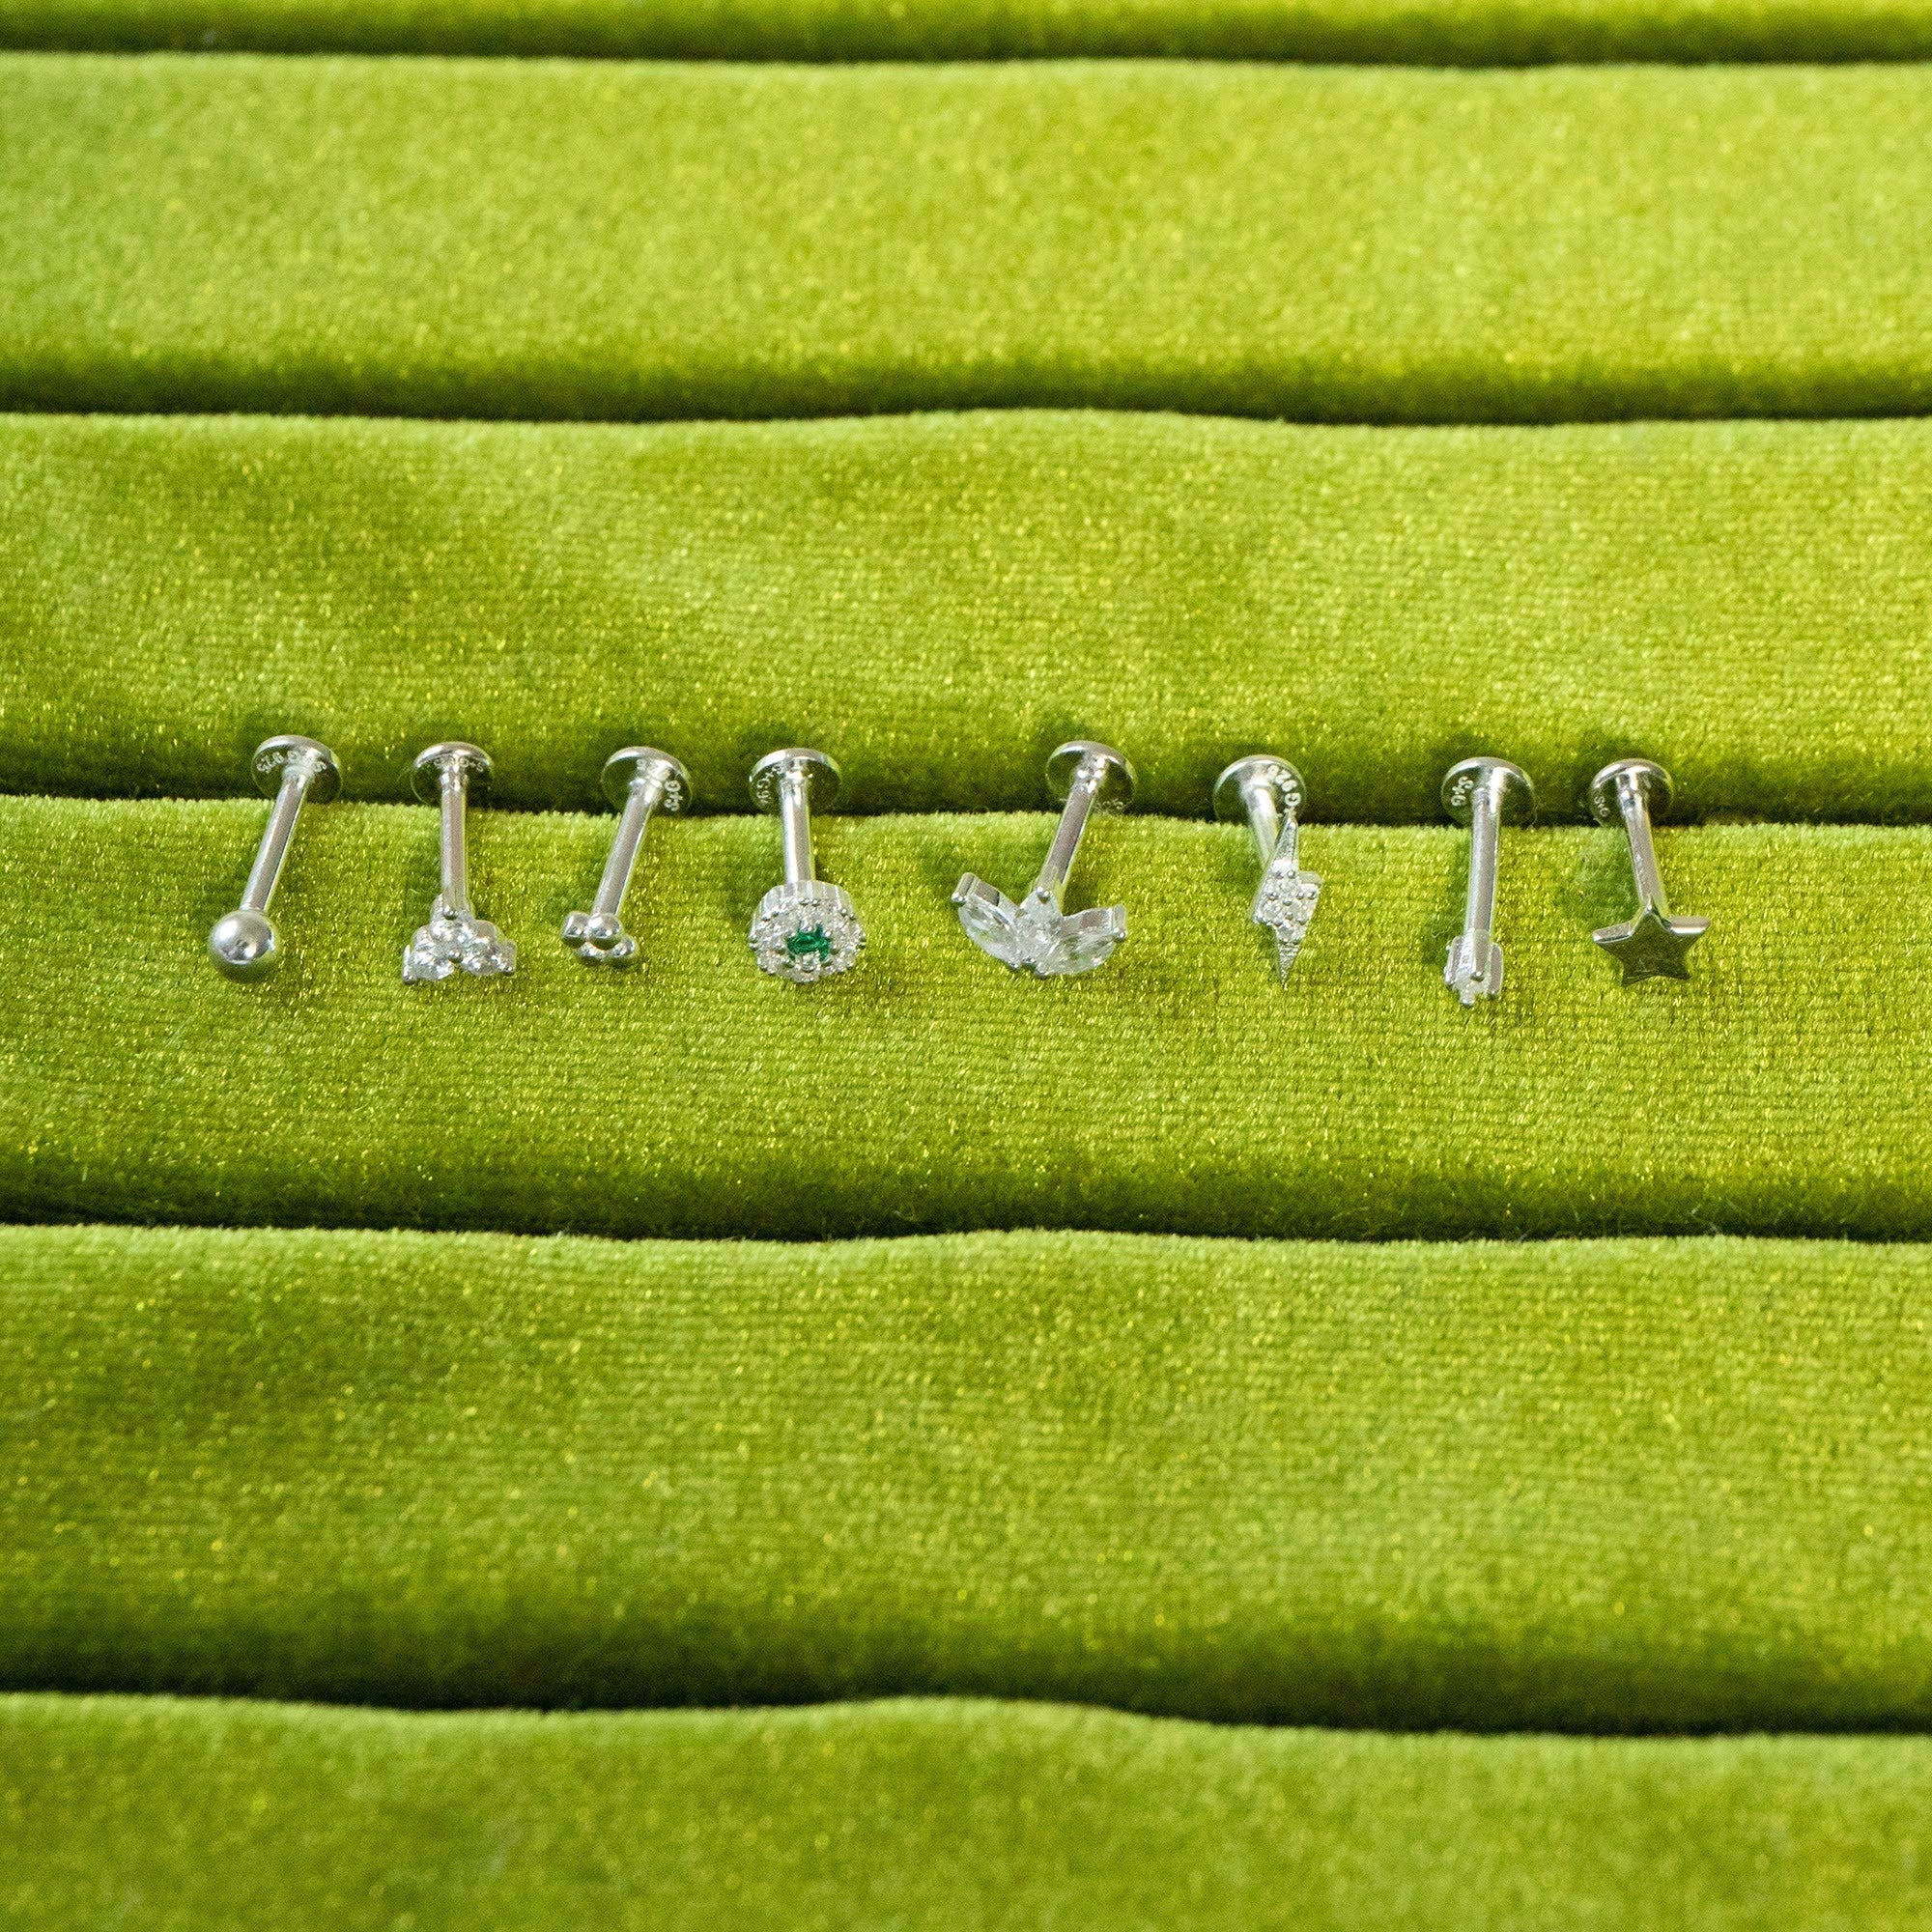 Sterling Silver Tiny Dotted Labret Stud Earring